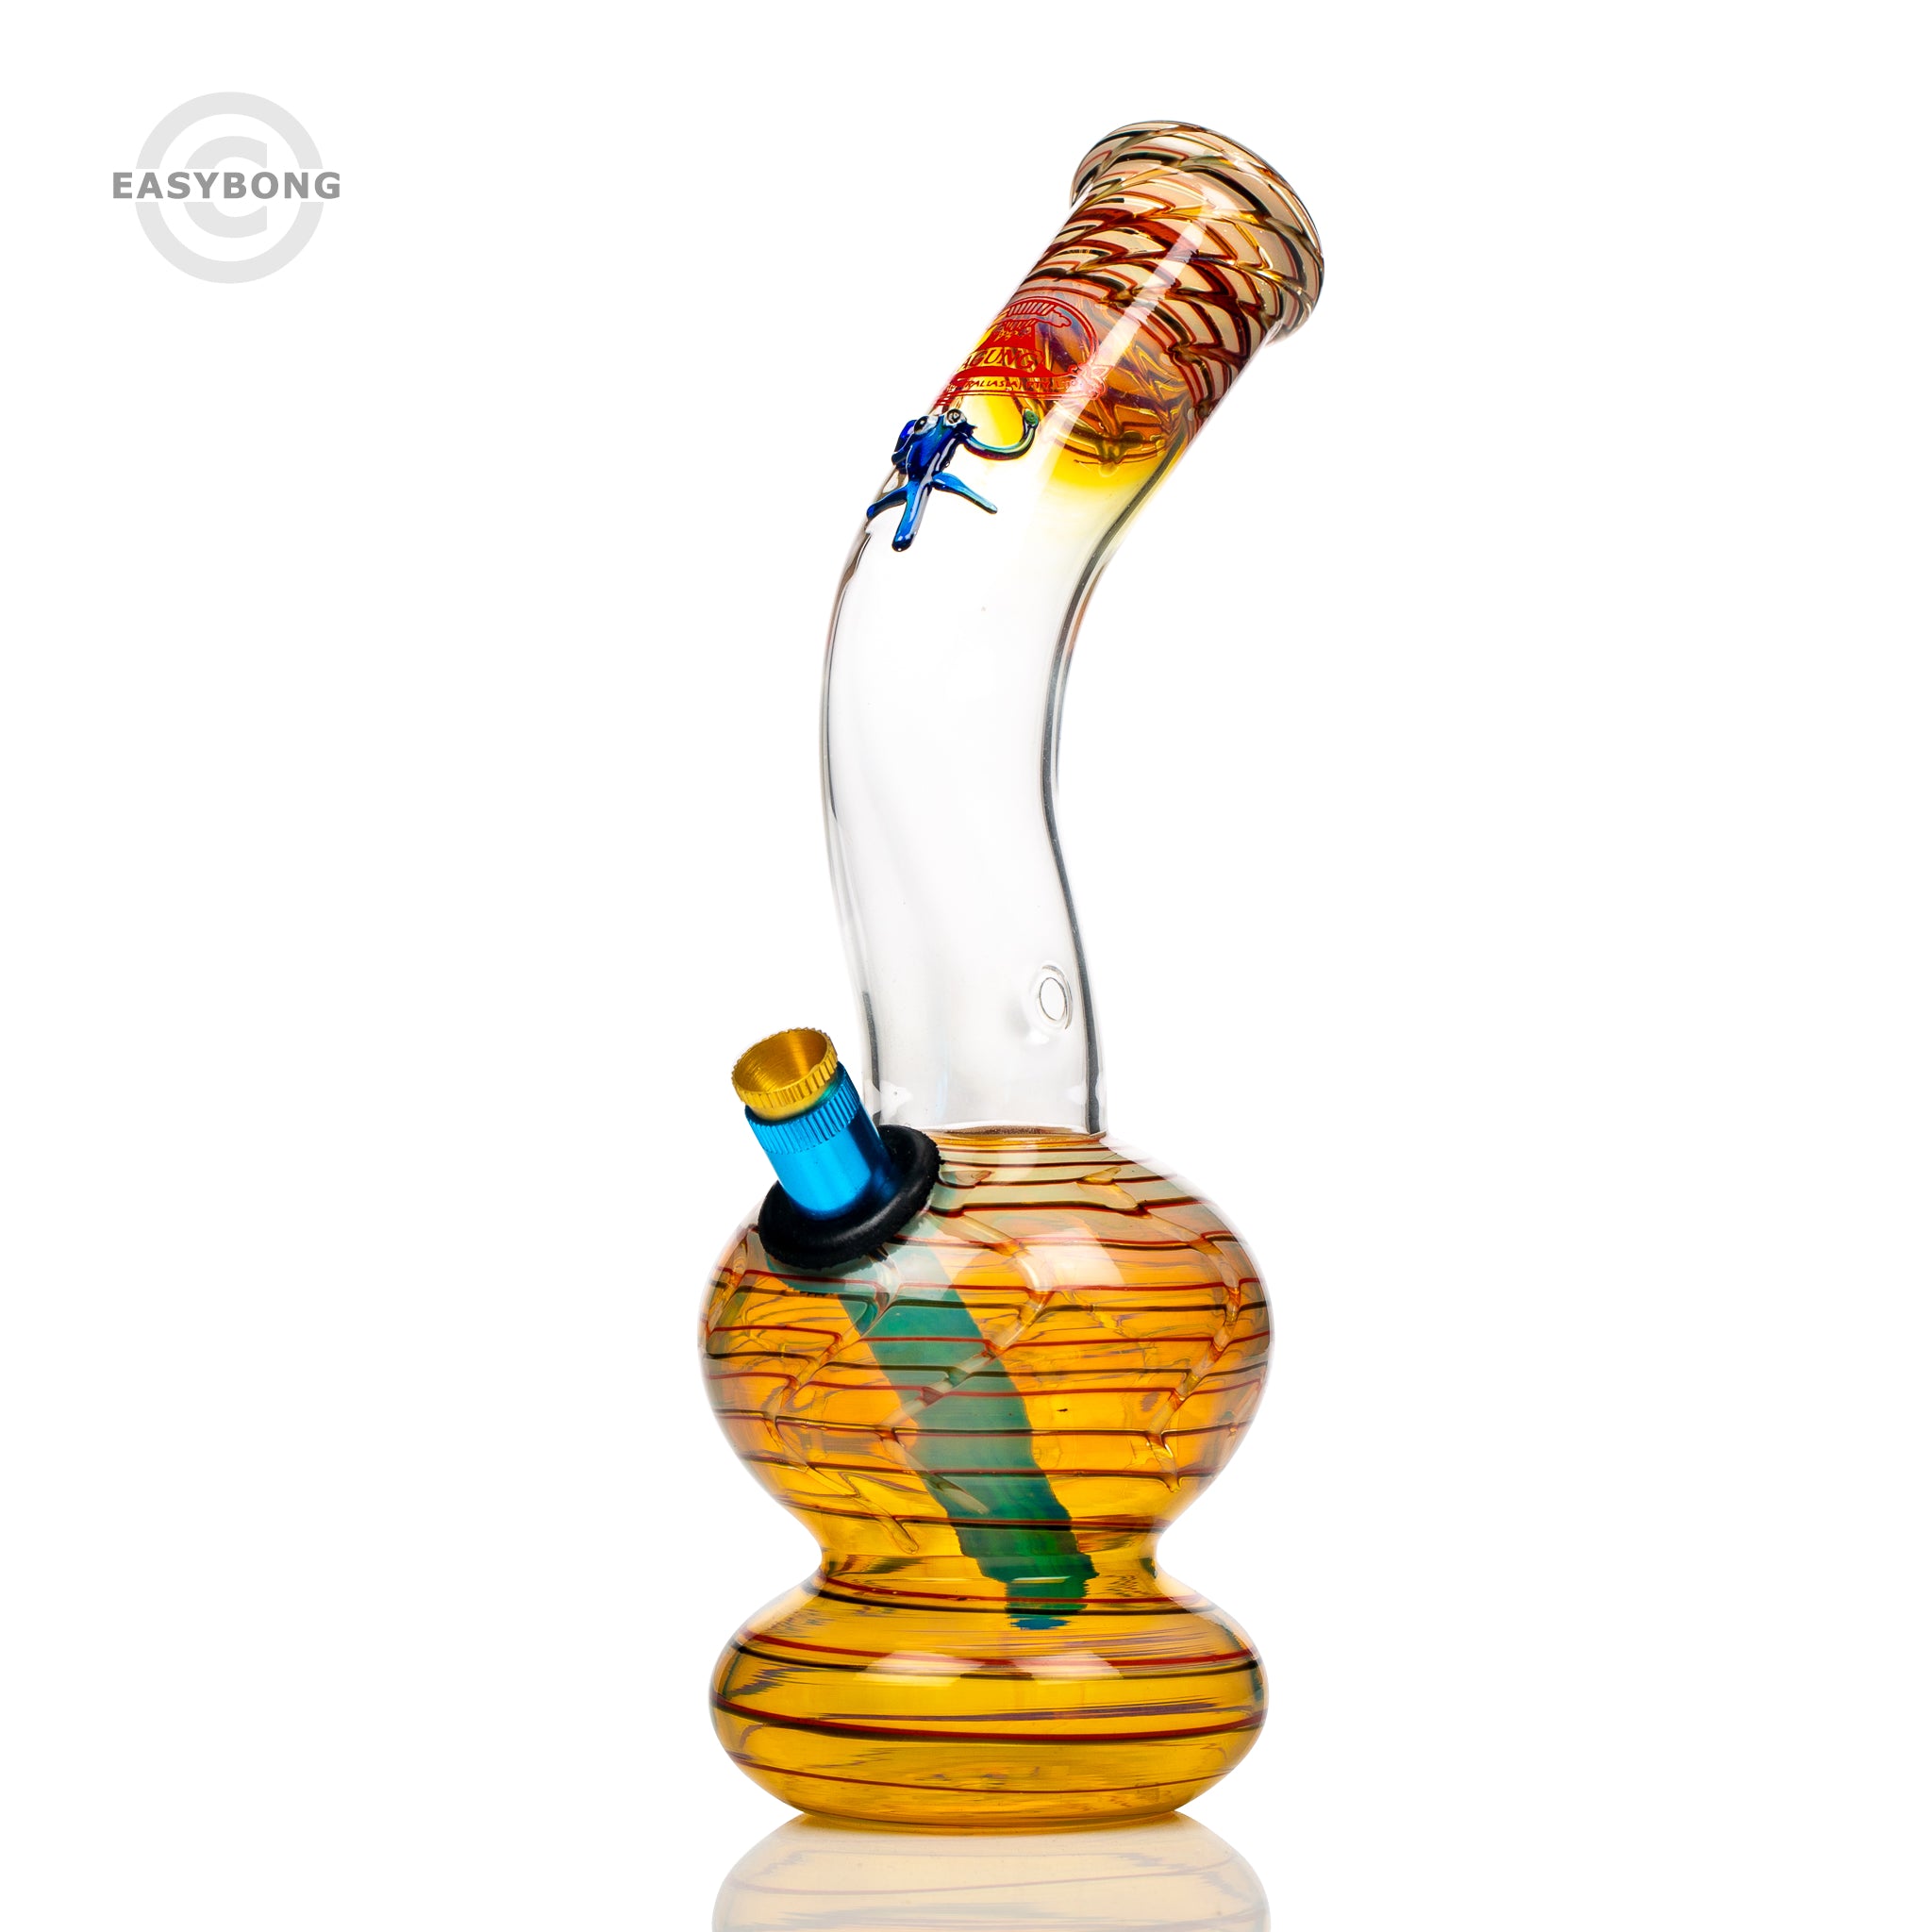 aussie style gold fumed glass bong from Agung.